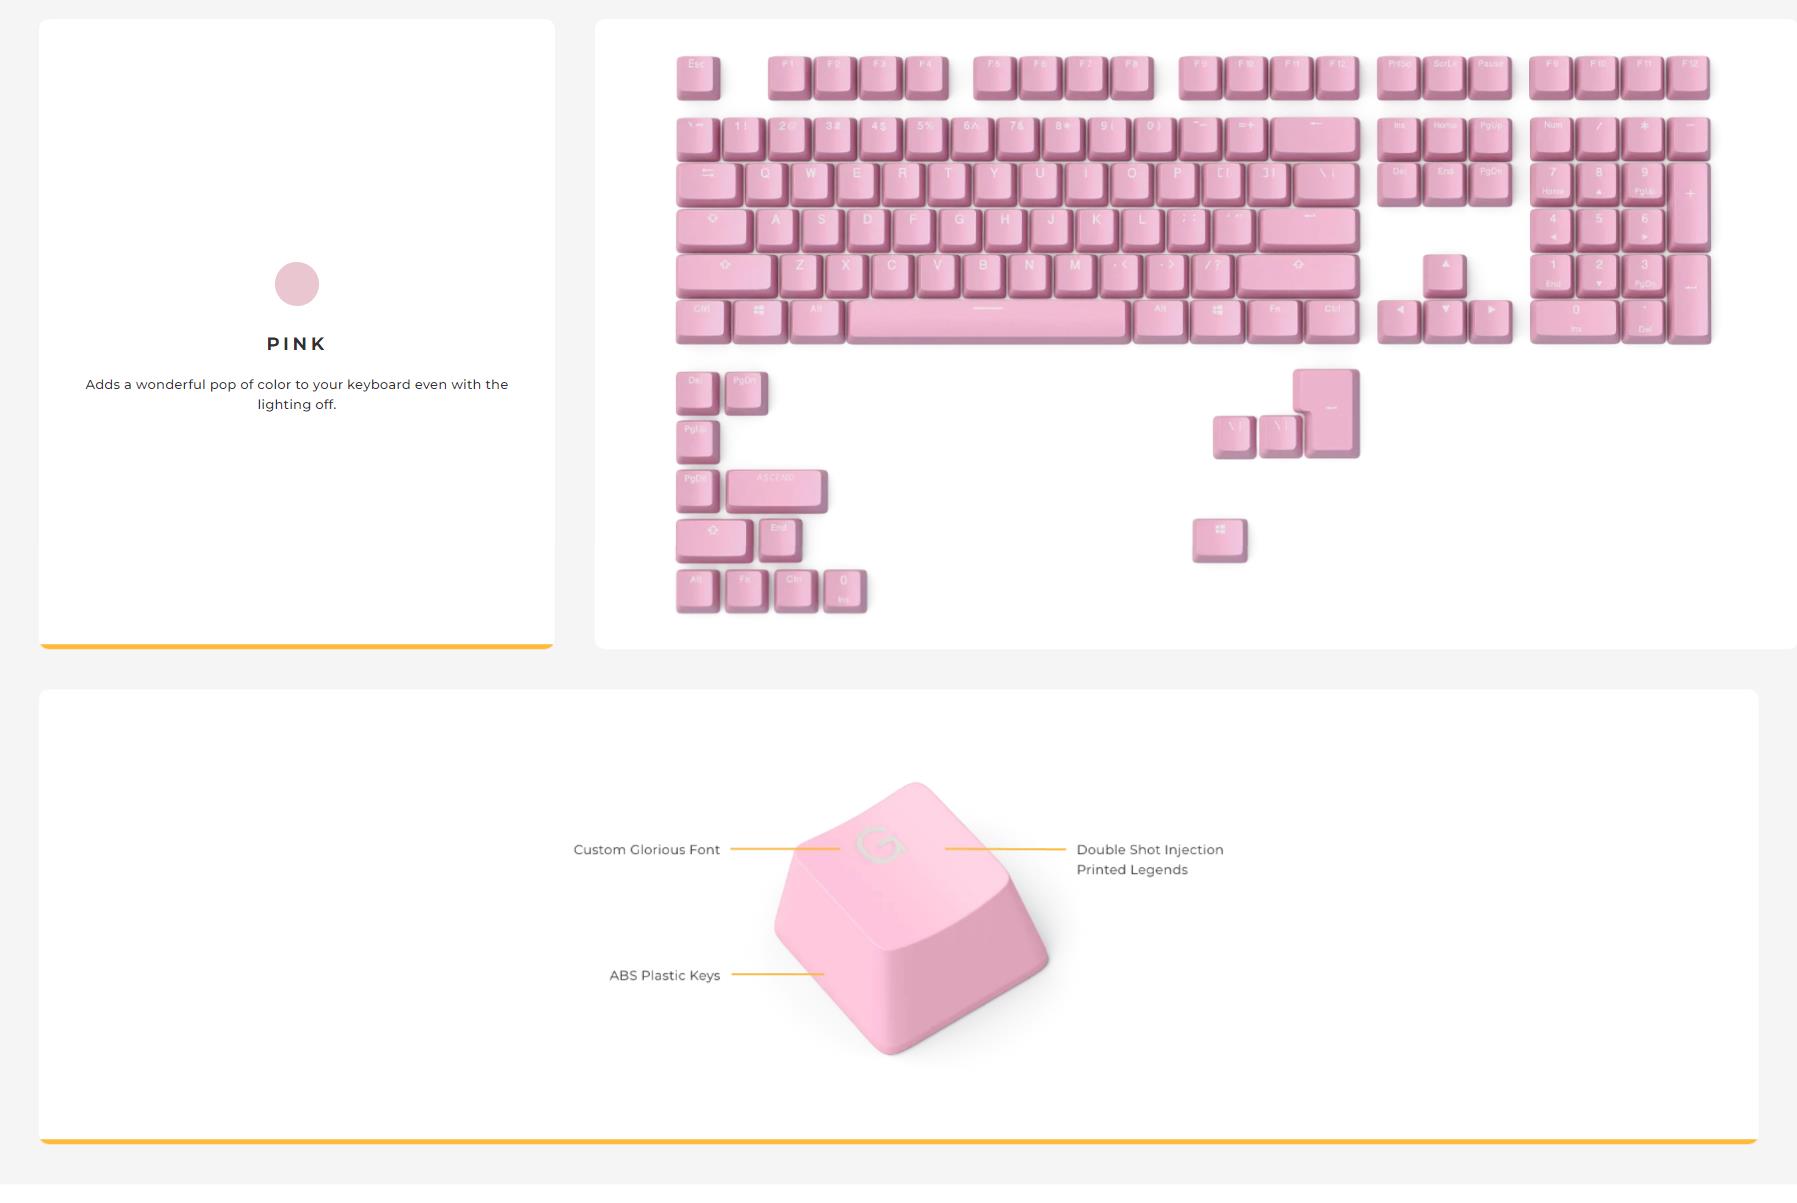 A large marketing image providing additional information about the product Glorious GMMK ABS Doubleshot V2 USA Base Kit Keycap Set 123pcs - Pixel Pink - Additional alt info not provided